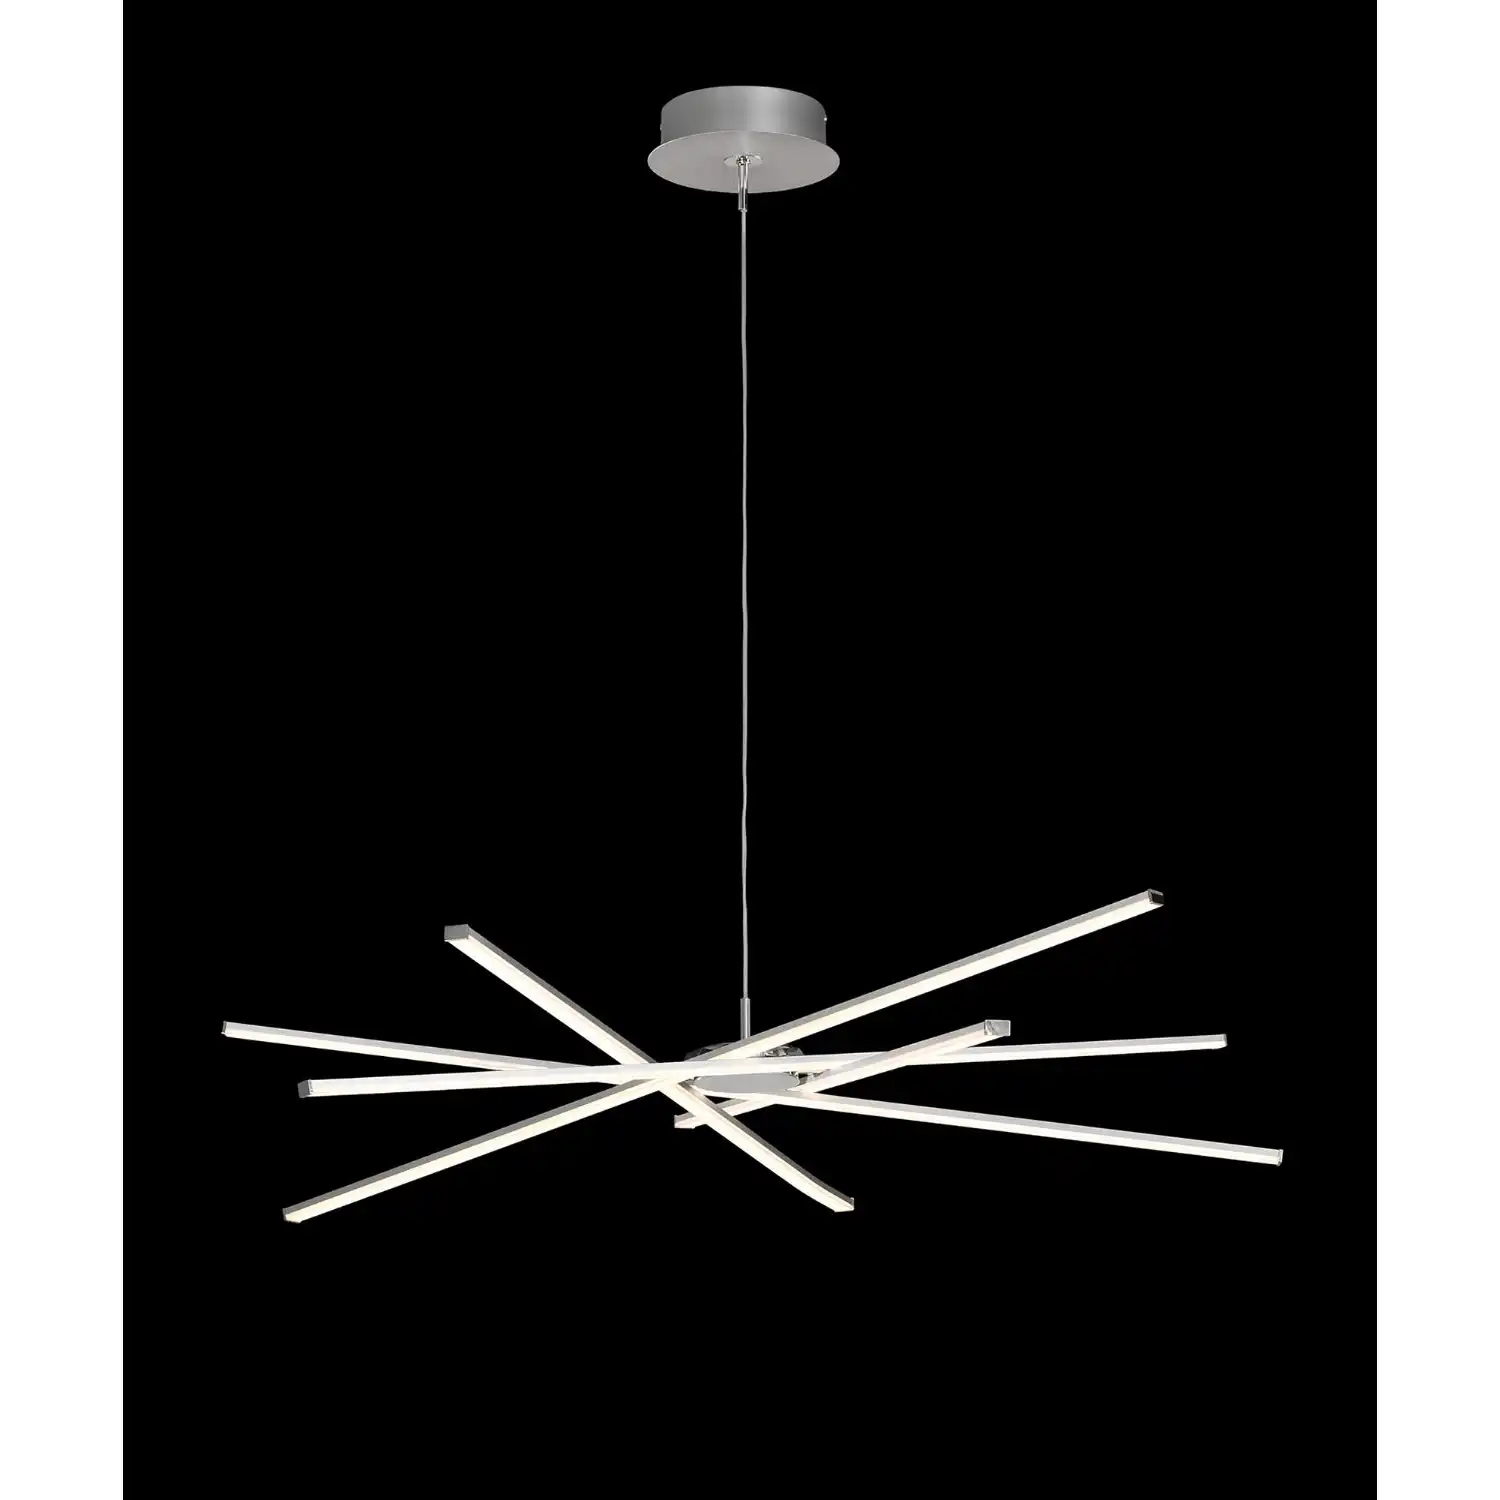 Star LED Pendant 100cm Round 60W 3000K, 4800lm, Dimmable Silver Frosted Acrylic Polished Chrome, 3yrs Warranty